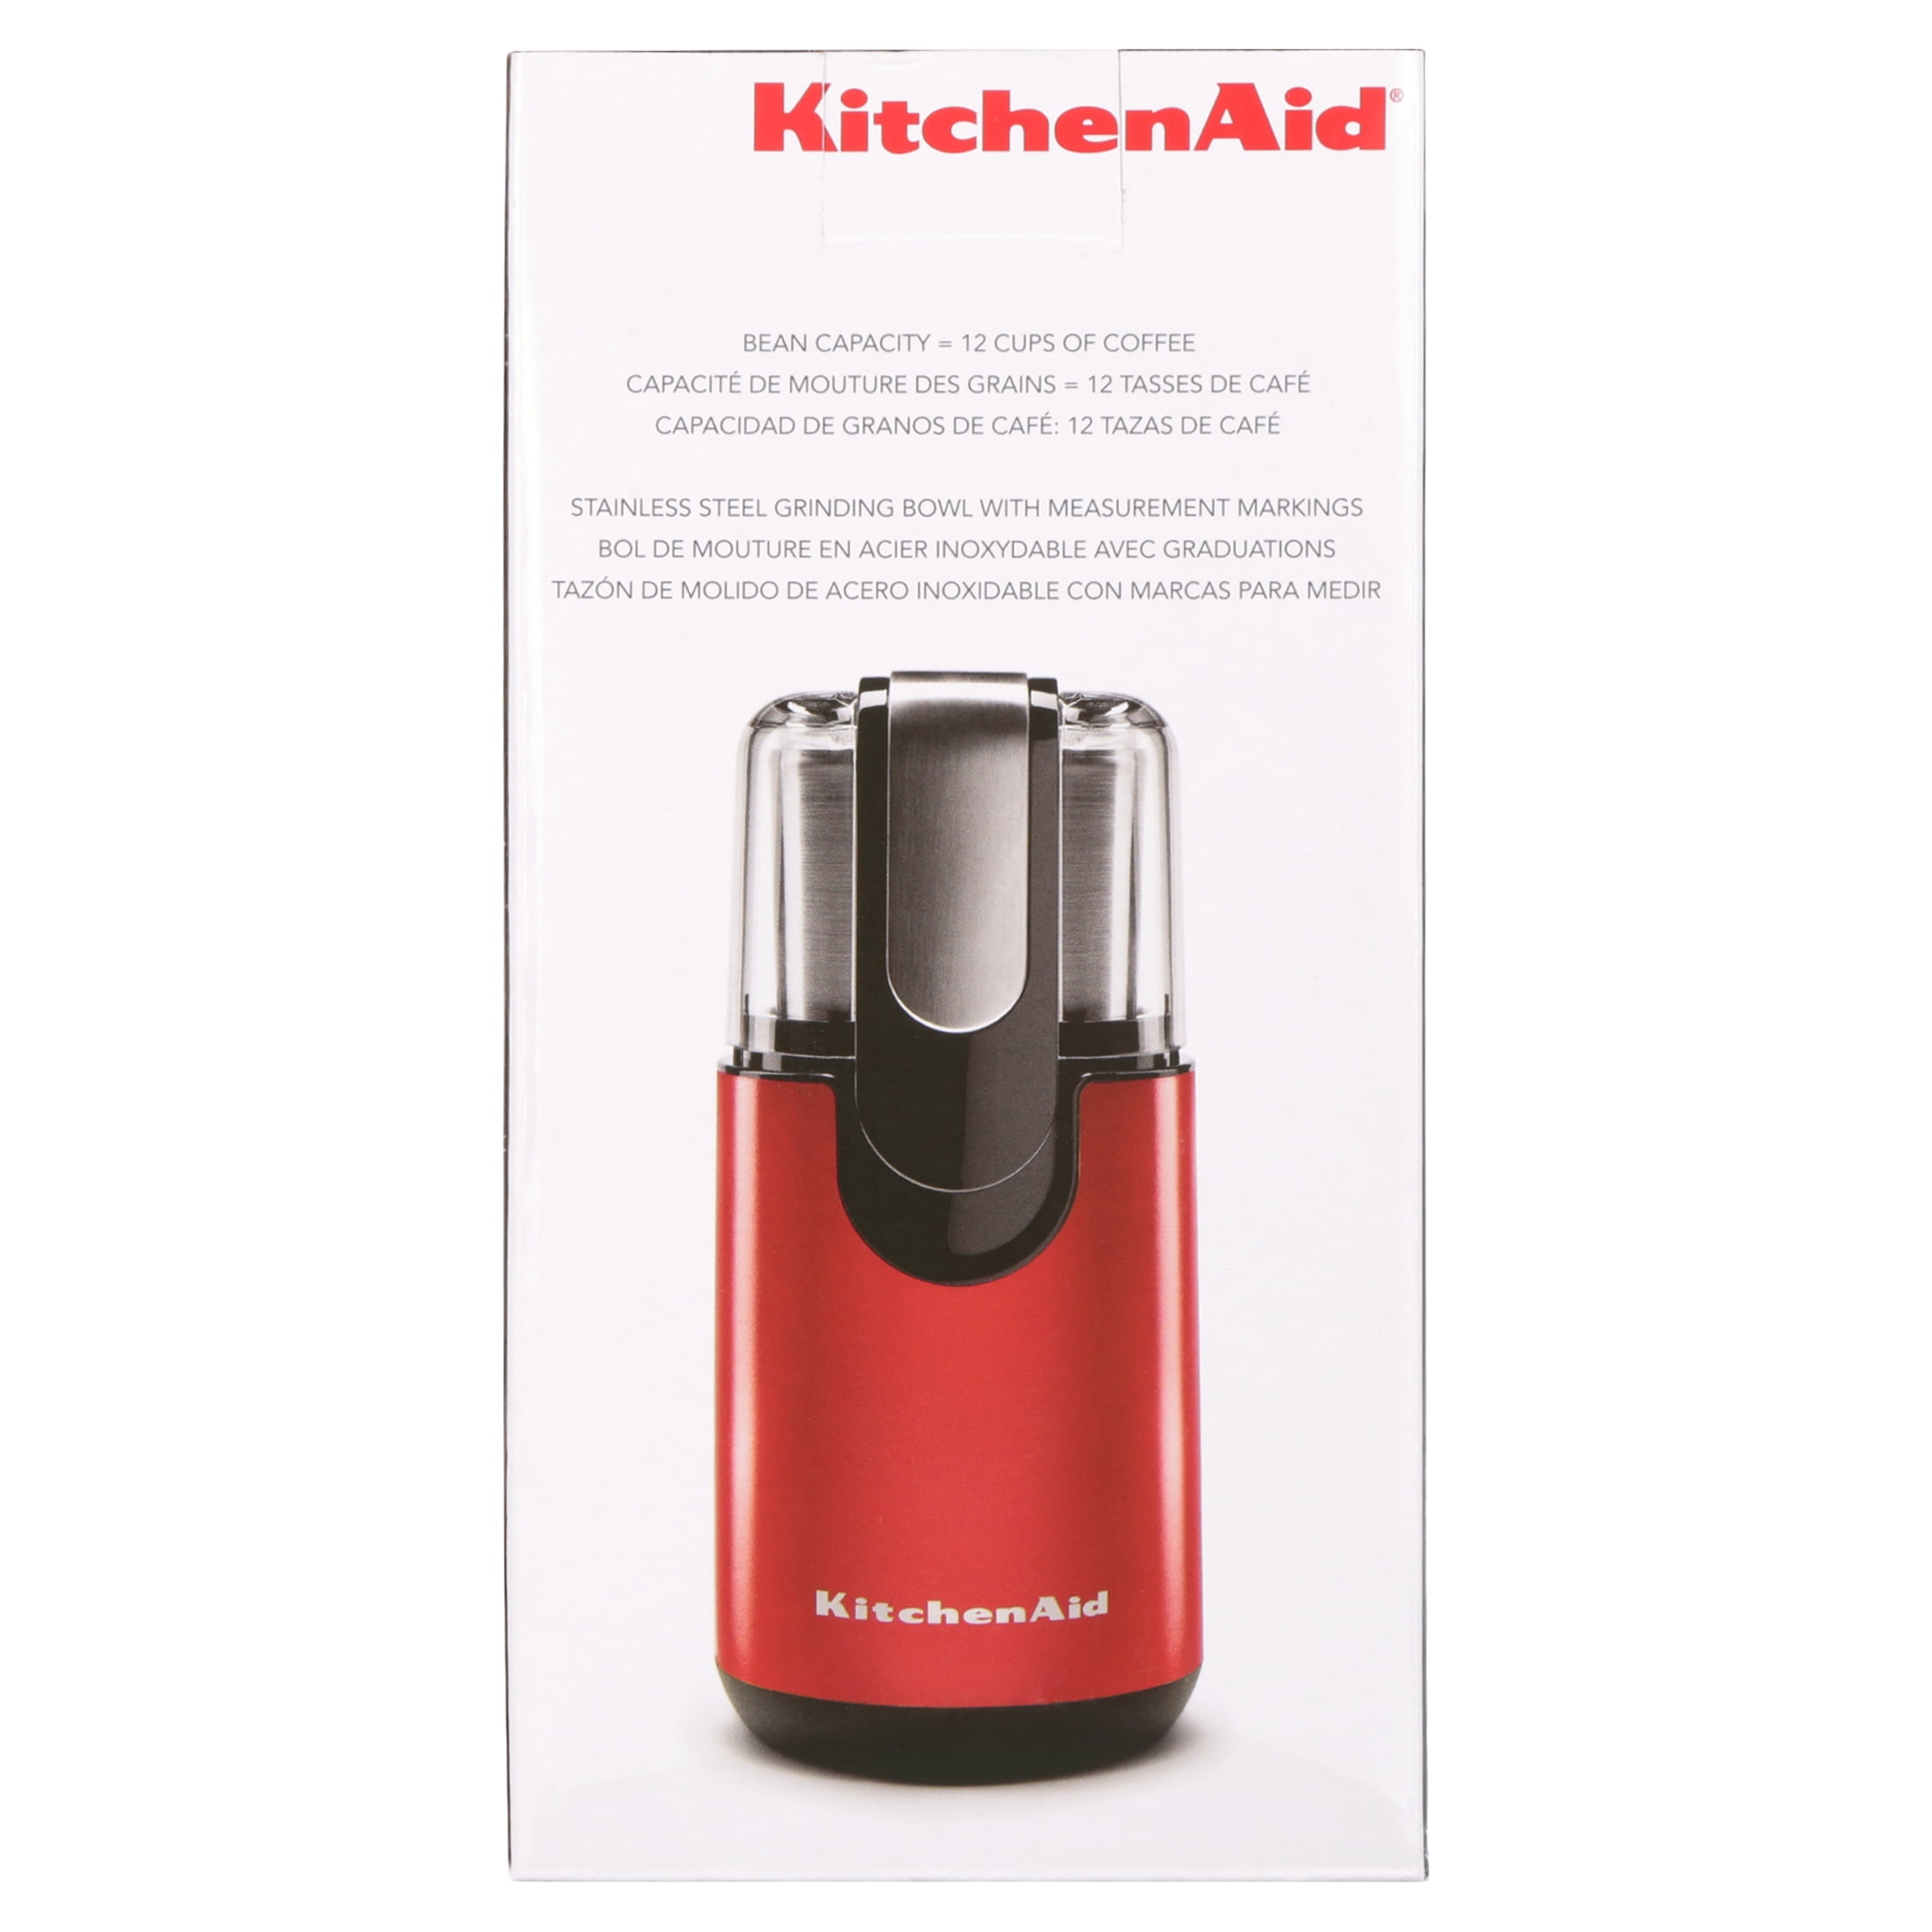 KitchenAid® BCG211OB Stainless Steel Coffee & Spice Grinder